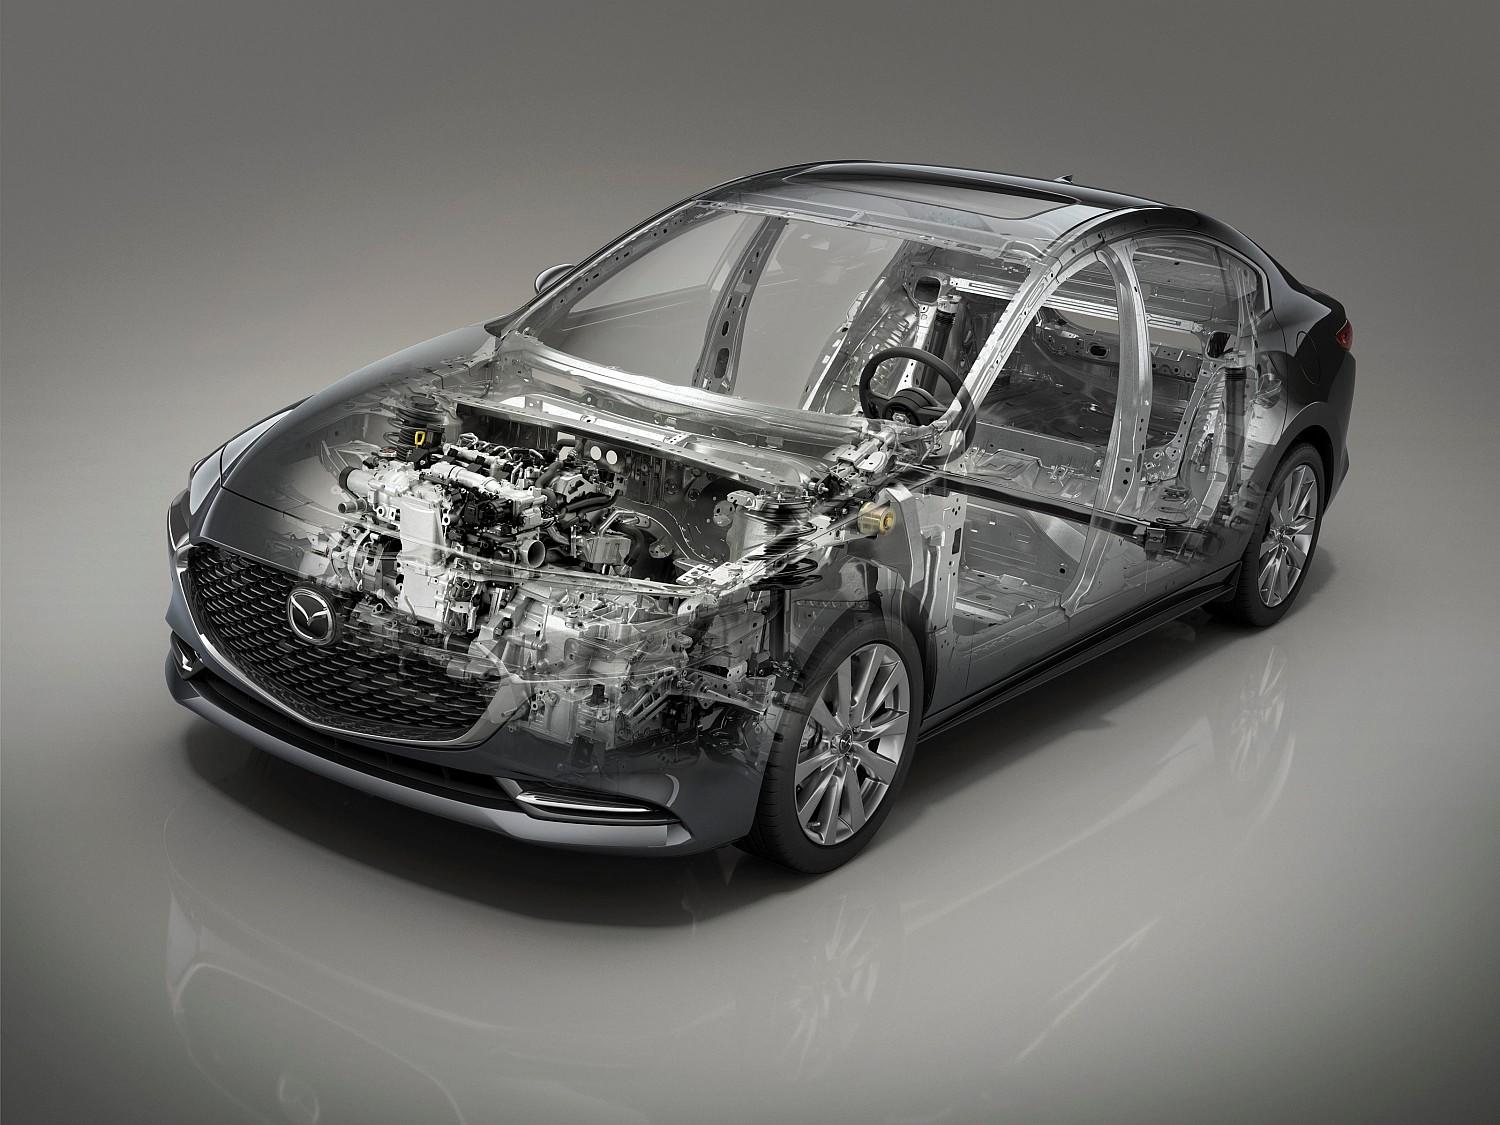 43_All-New-Mazda3_Technical_See-through_SDN_lowres